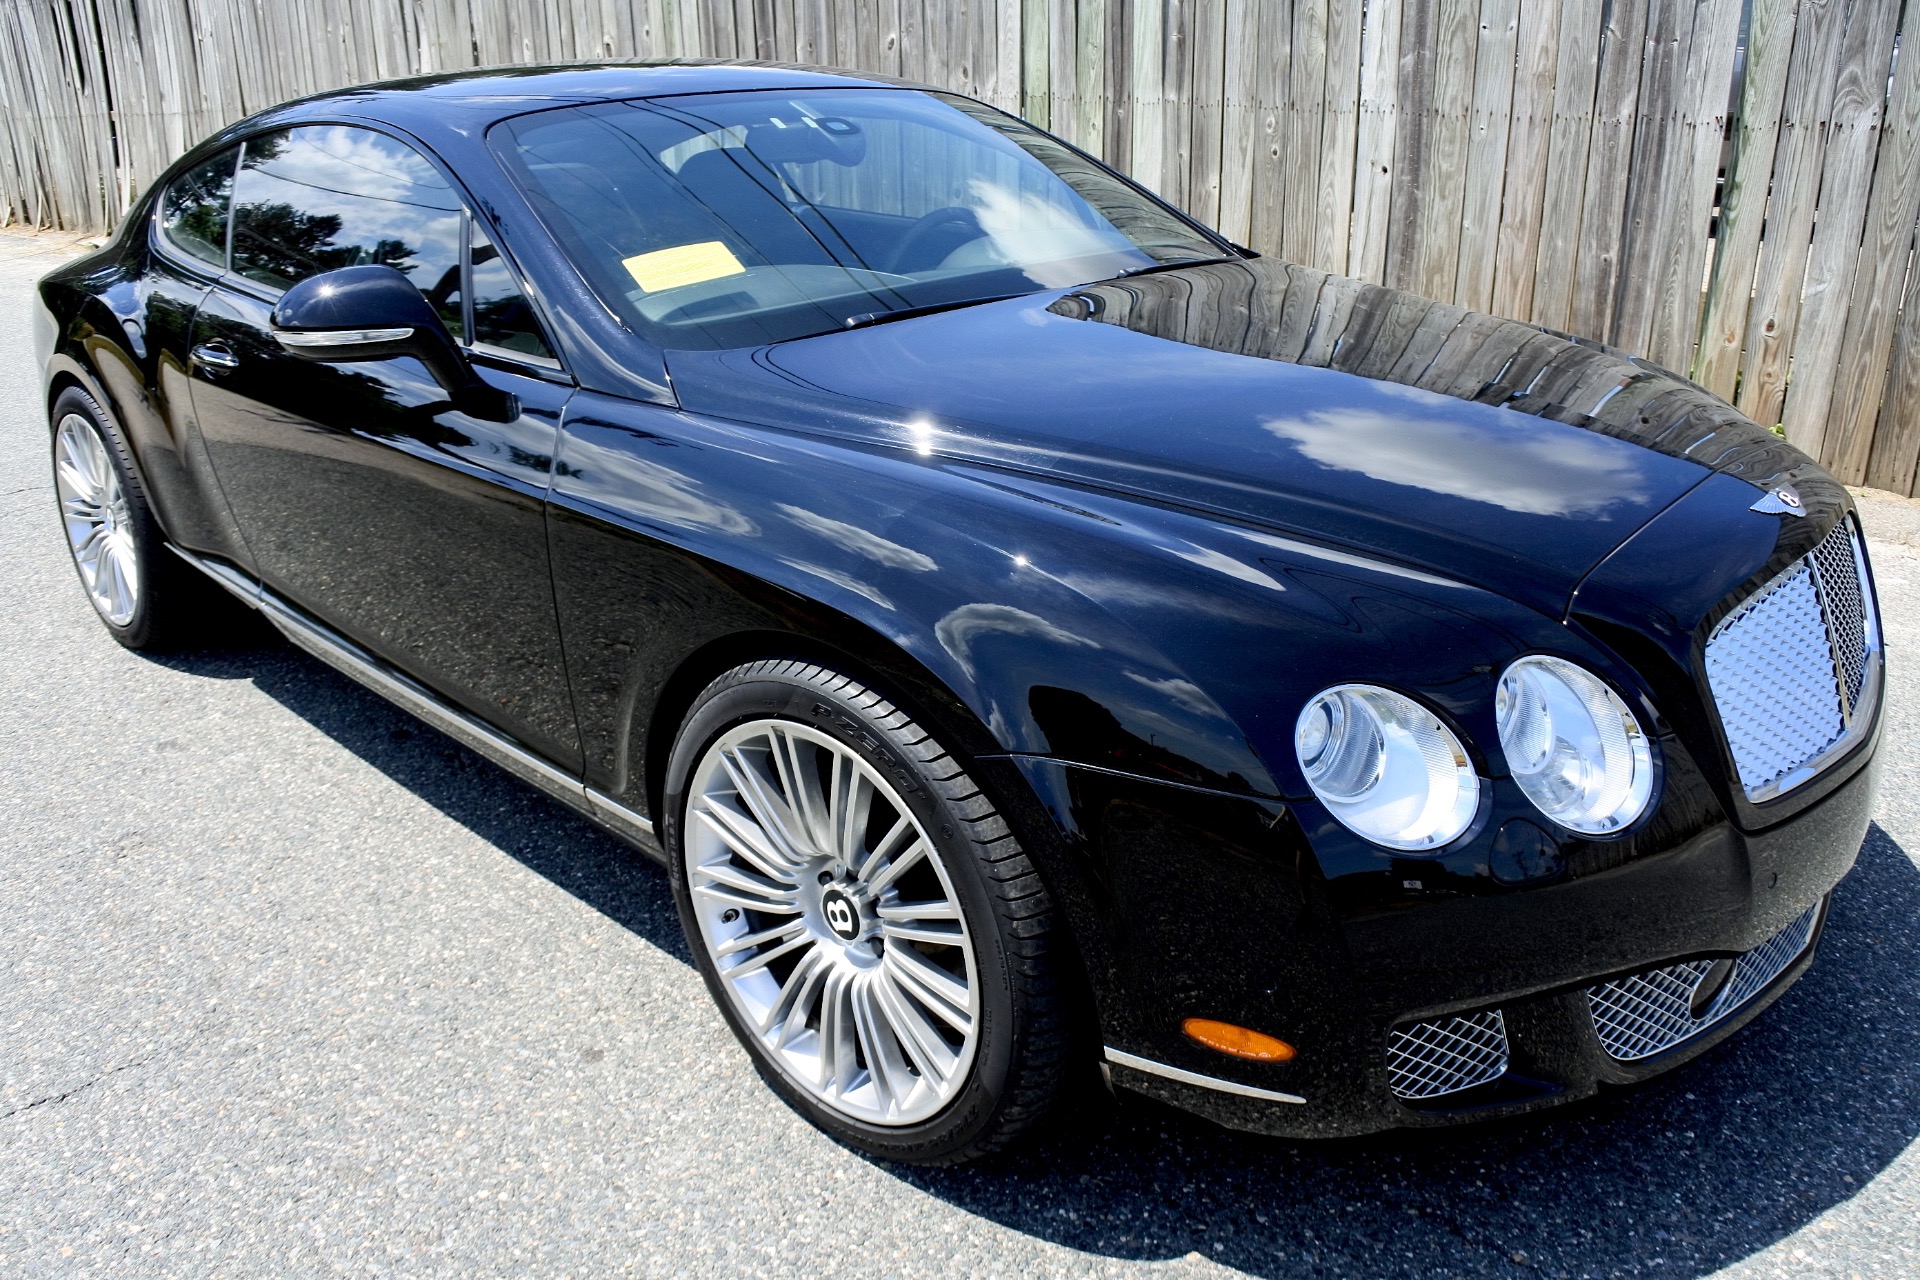 Used 2010 Bentley Continental Gt Speed AWD For Sale Special Pricing 